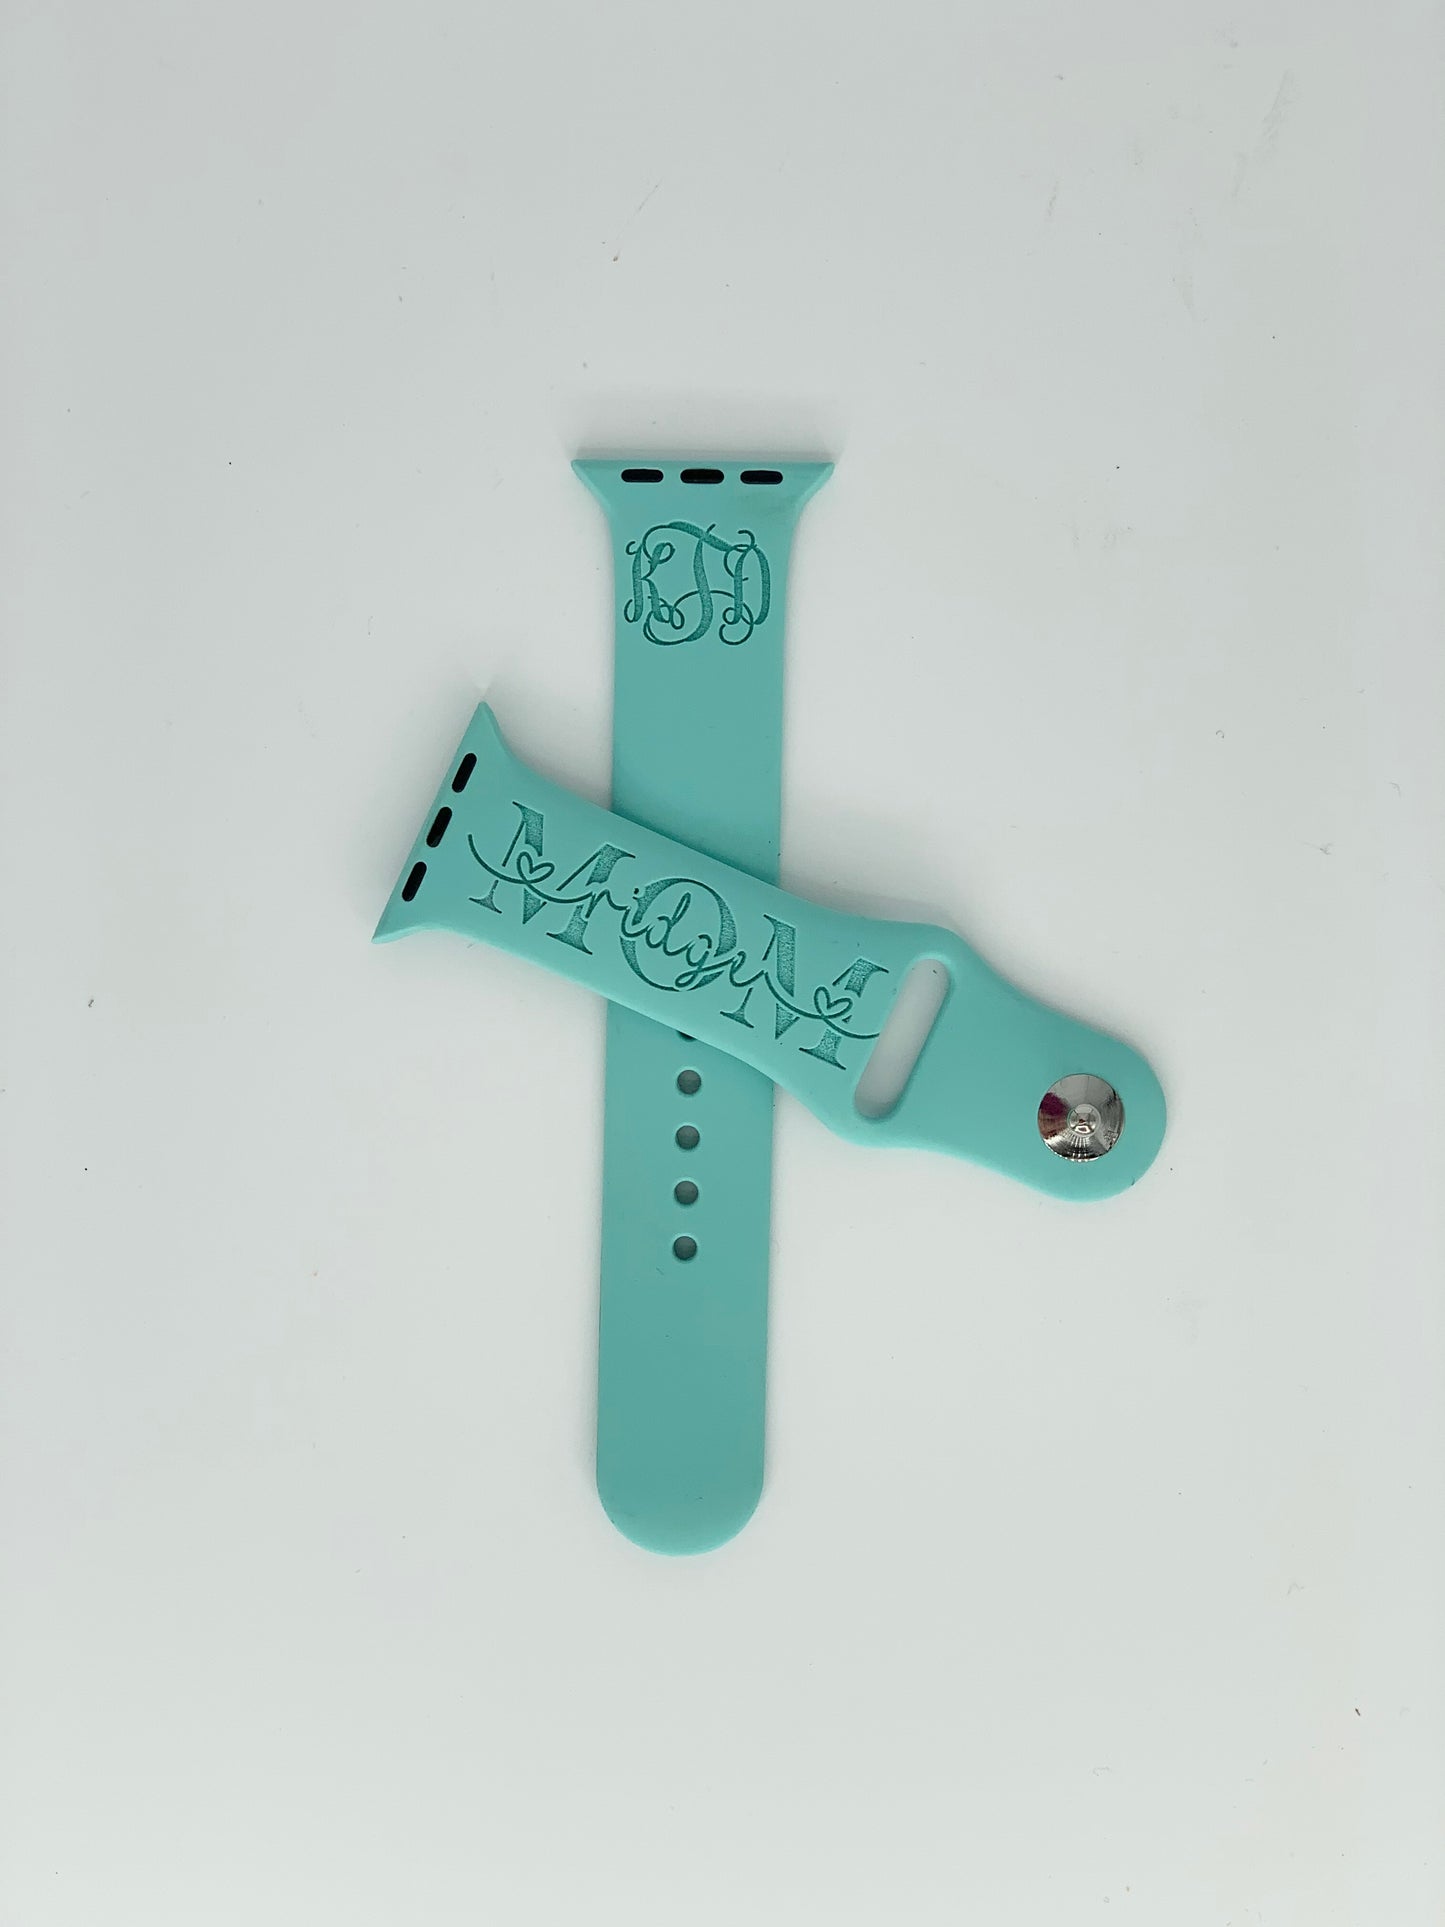 Personalized Mom Watch Band